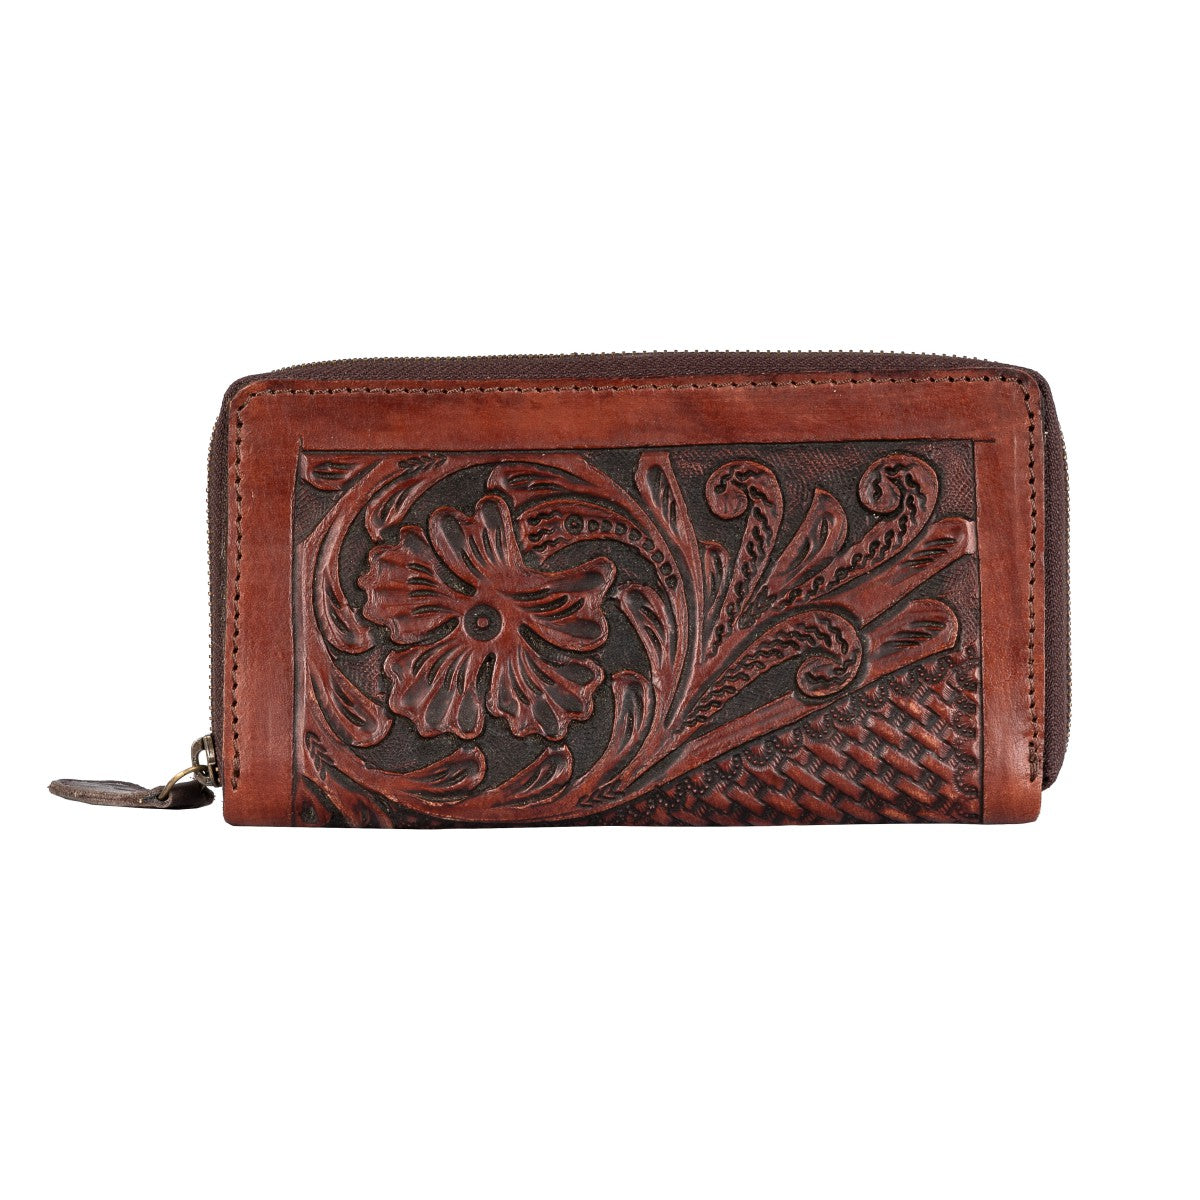 Rowdy Crowd Carved Leather Wallet